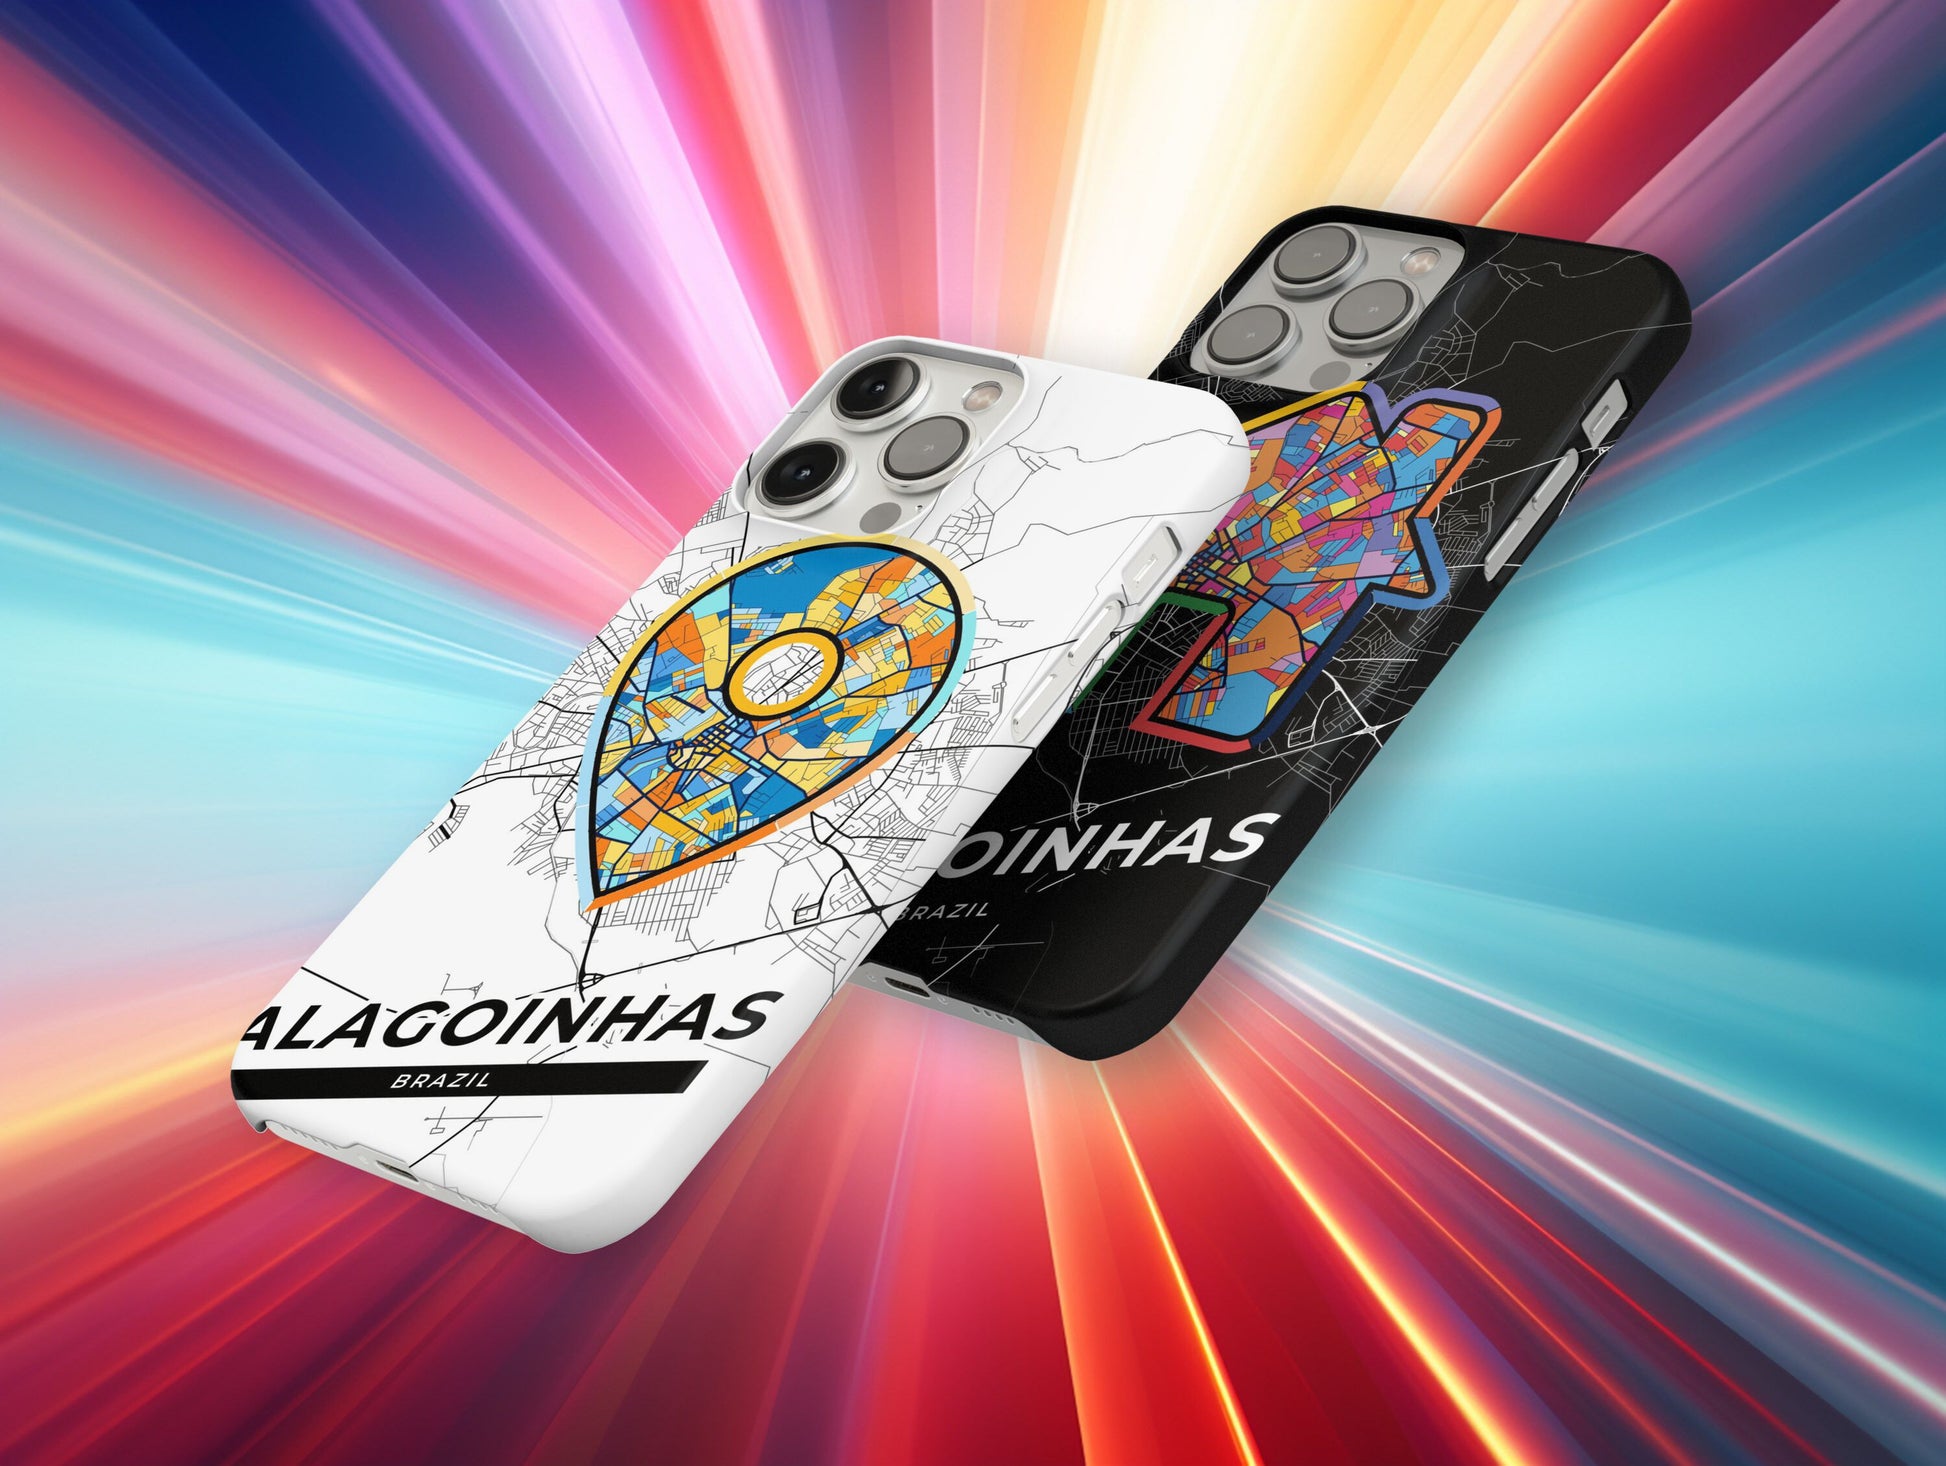 Alagoinhas Brazil slim phone case with colorful icon. Birthday, wedding or housewarming gift. Couple match cases.